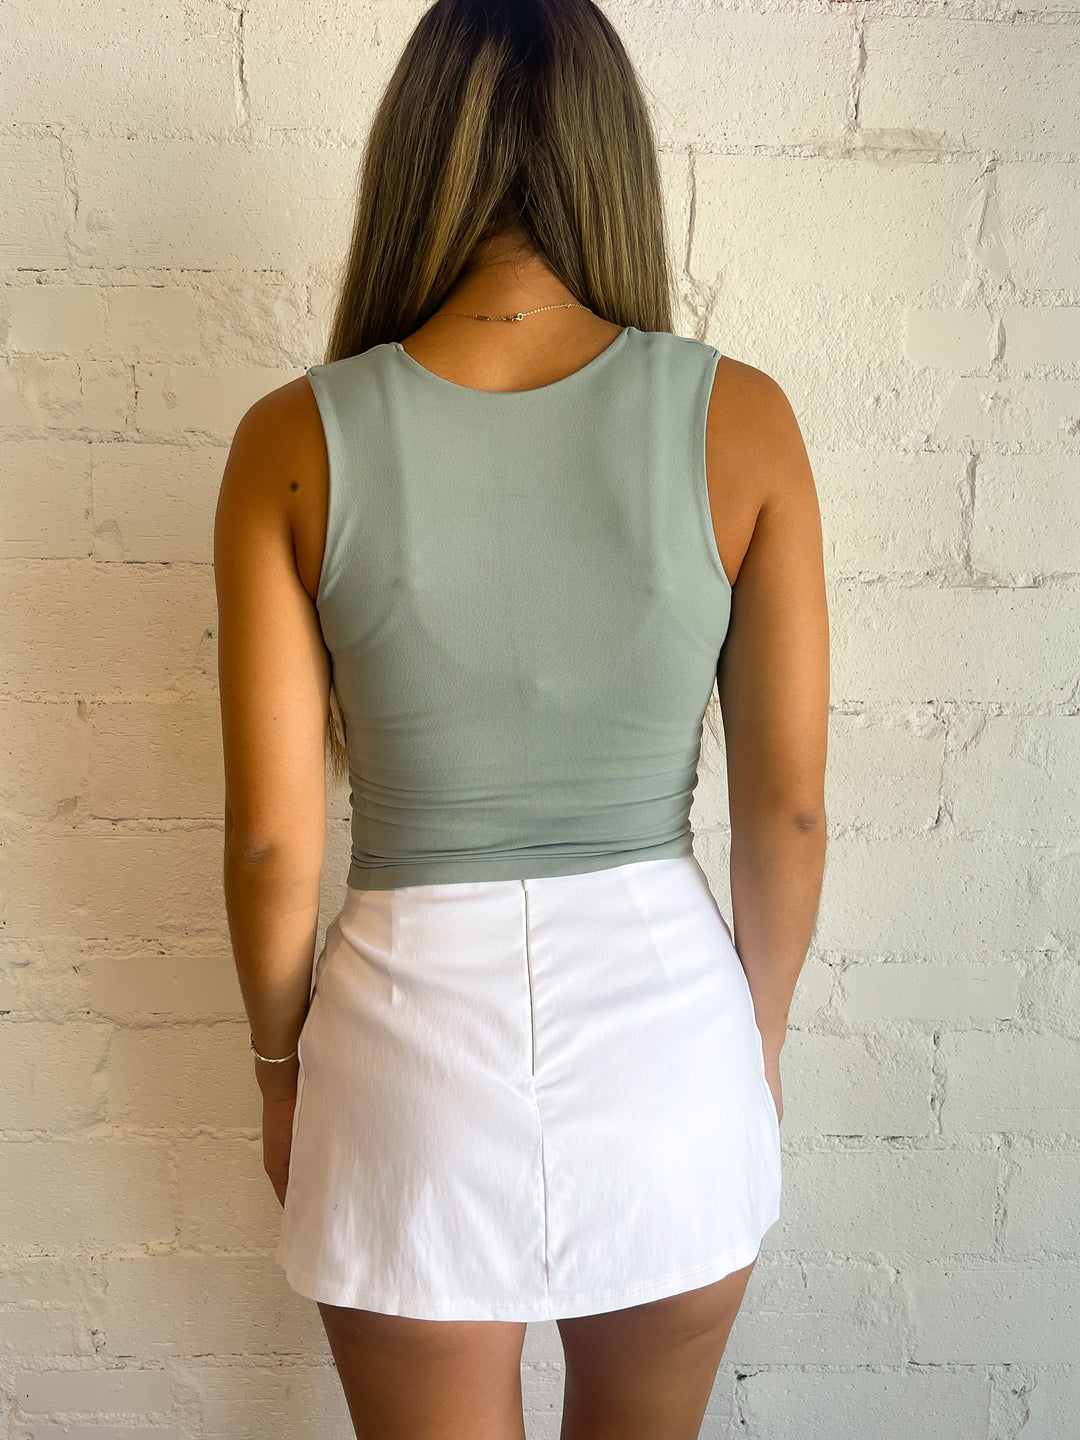 Free People Clean Lines Muscle Cami, Cami's, Free People, Adeline, dallas boutique, dallas texas, texas boutique, women's boutique dallas, adeline boutique, dallas boutique, trendy boutique, affordable boutique